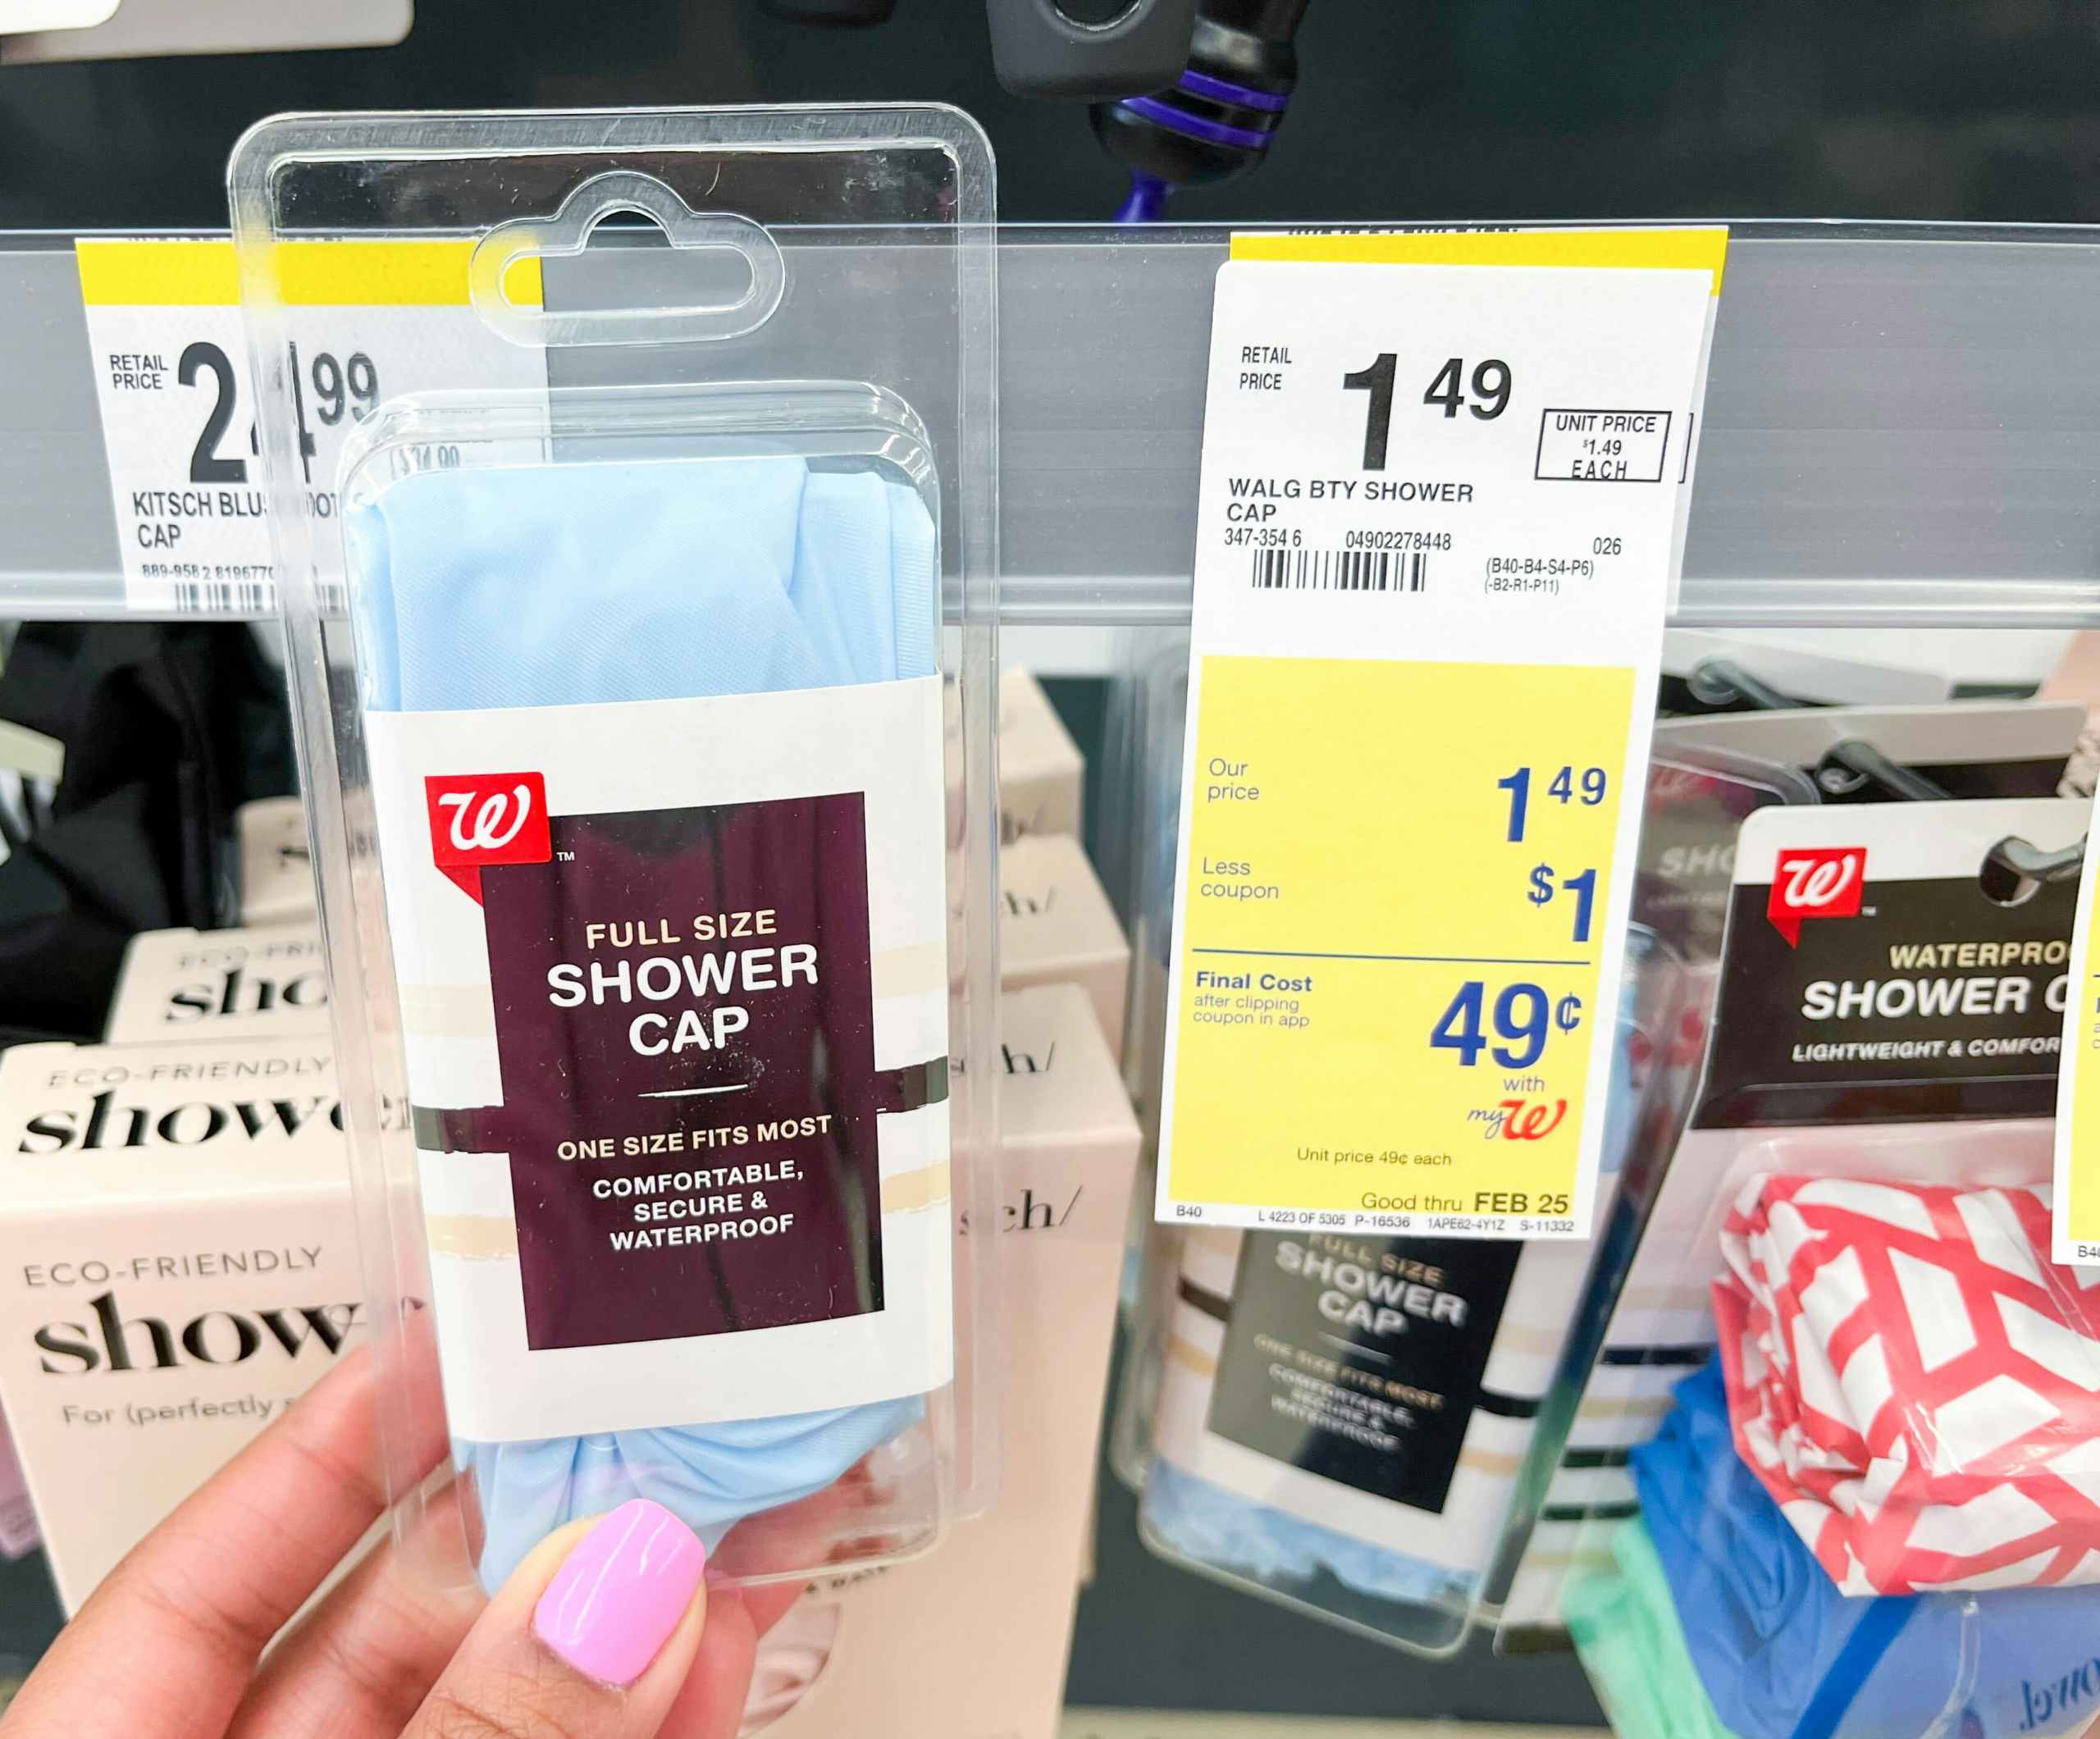 hand holding a pack of one Walgreens shower cap next to price tag